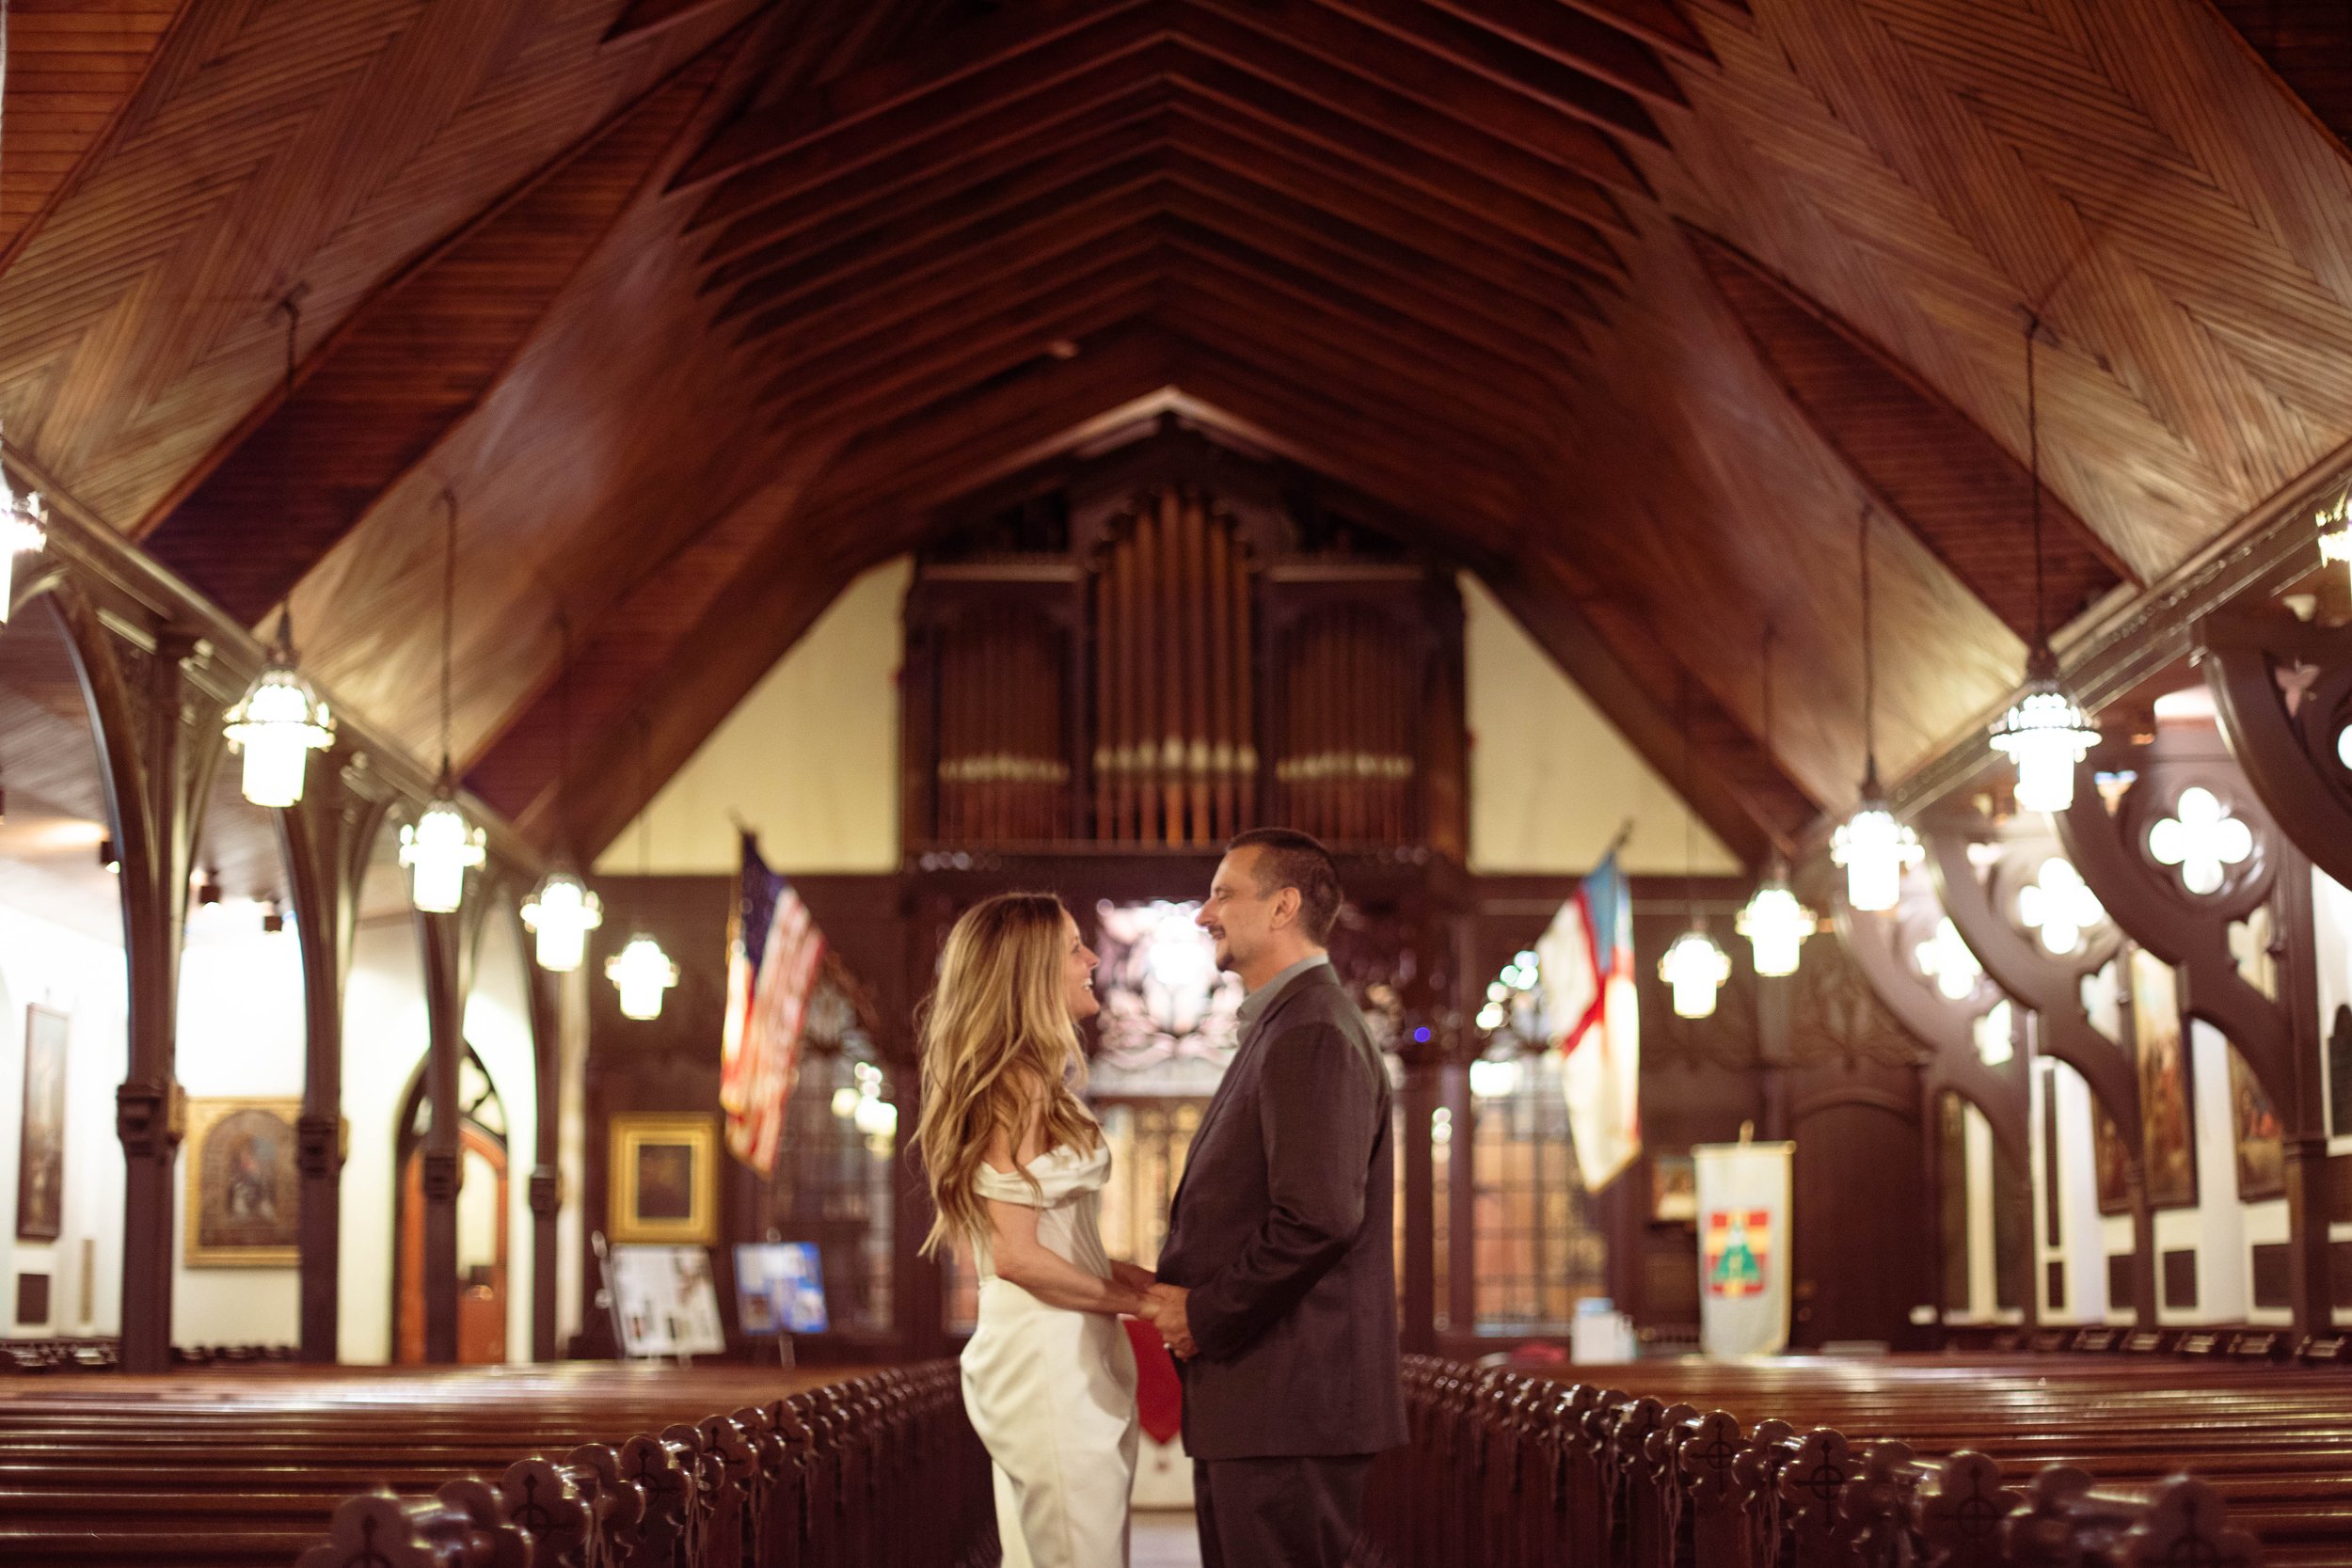 Stunning stained glass windows and wooden pews set the stage for romance. ✨ #NYCWeddingVenue #HistoricChurch